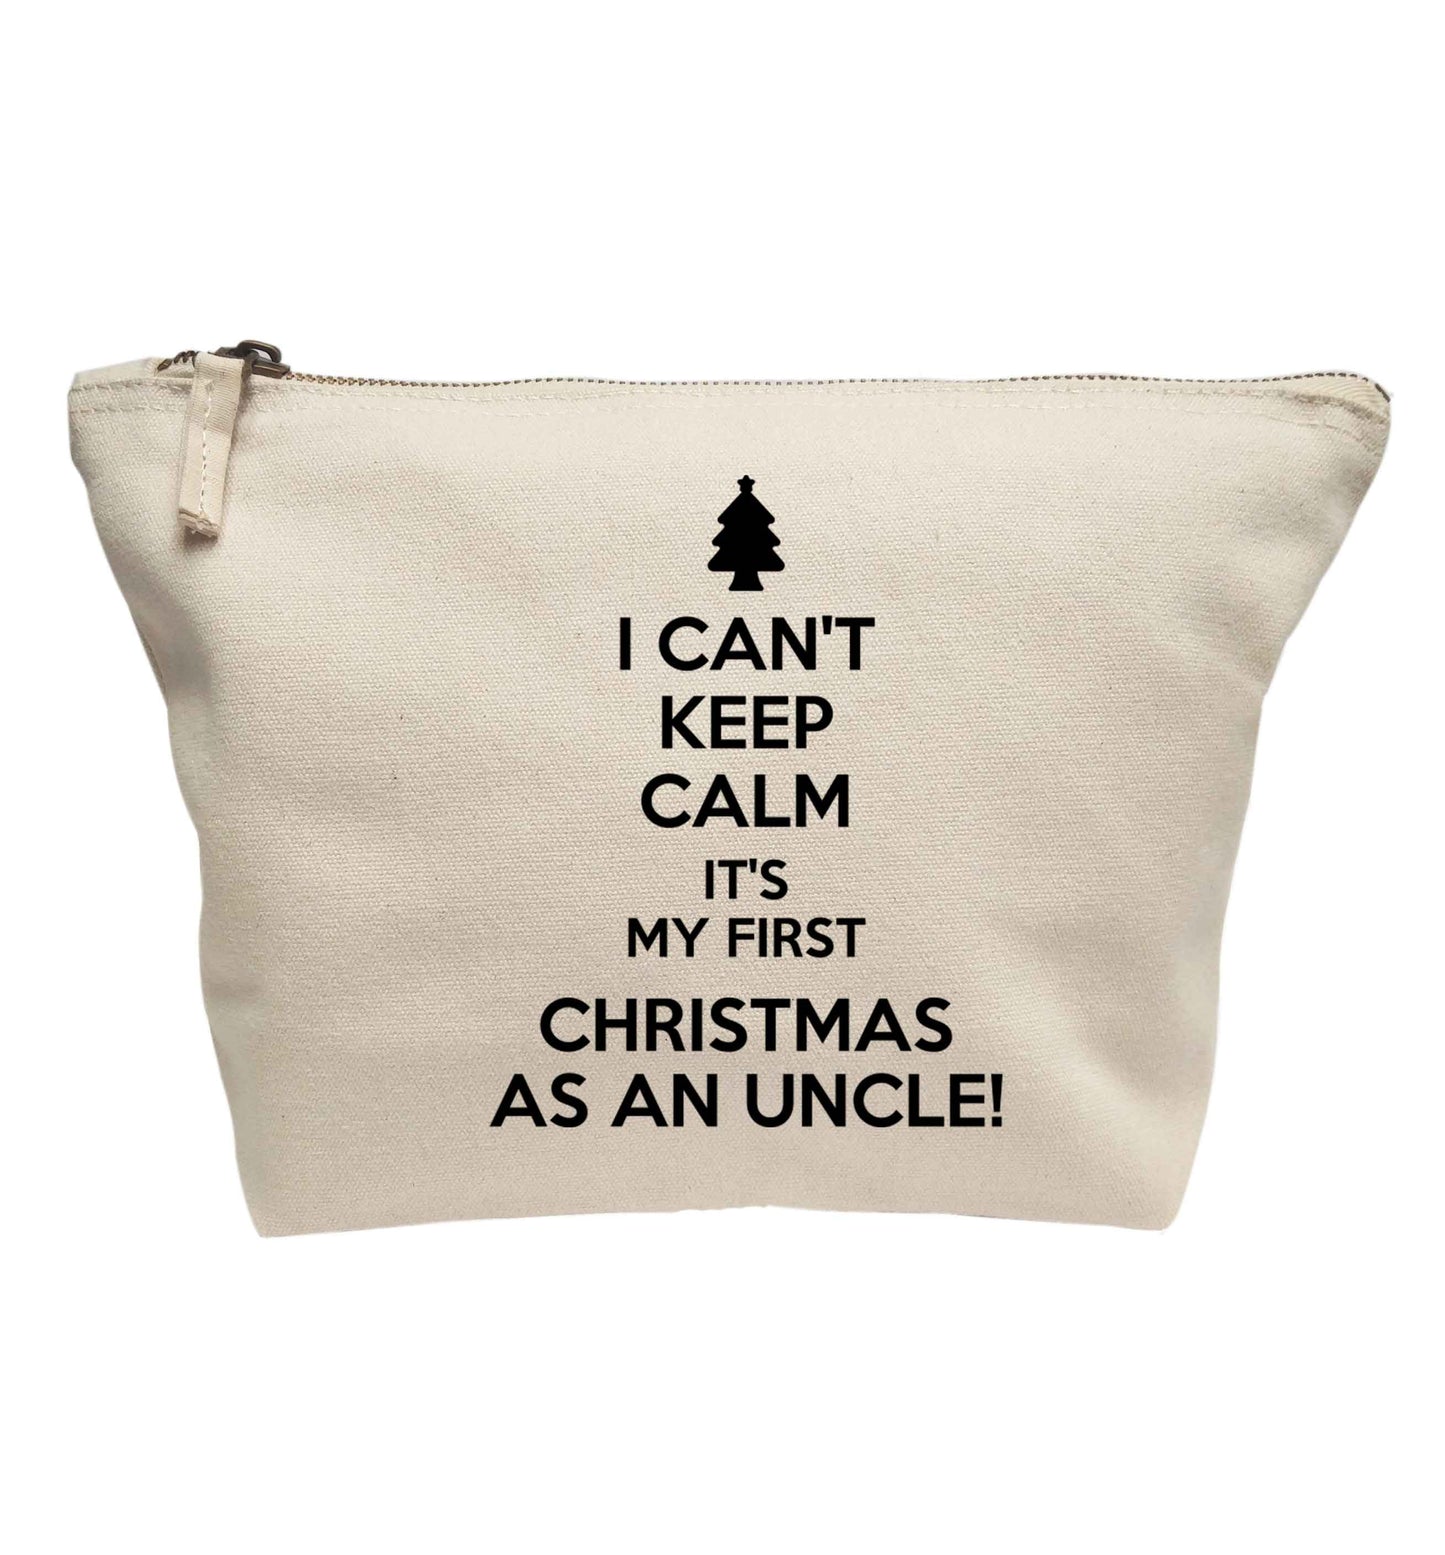 I can't keep calm it's my first Christmas as an uncle! | makeup / wash bag